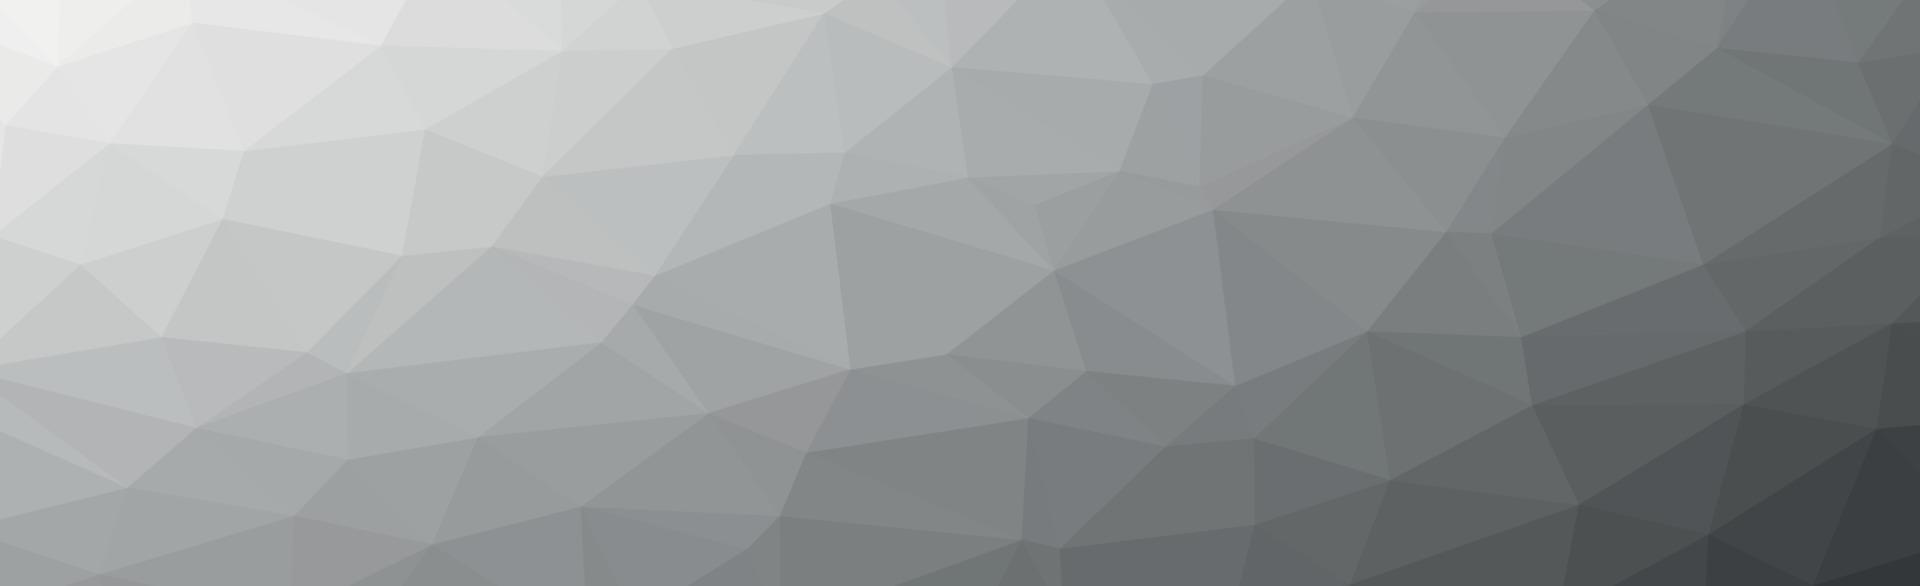 Abstract gray triangles background in different sizes vector